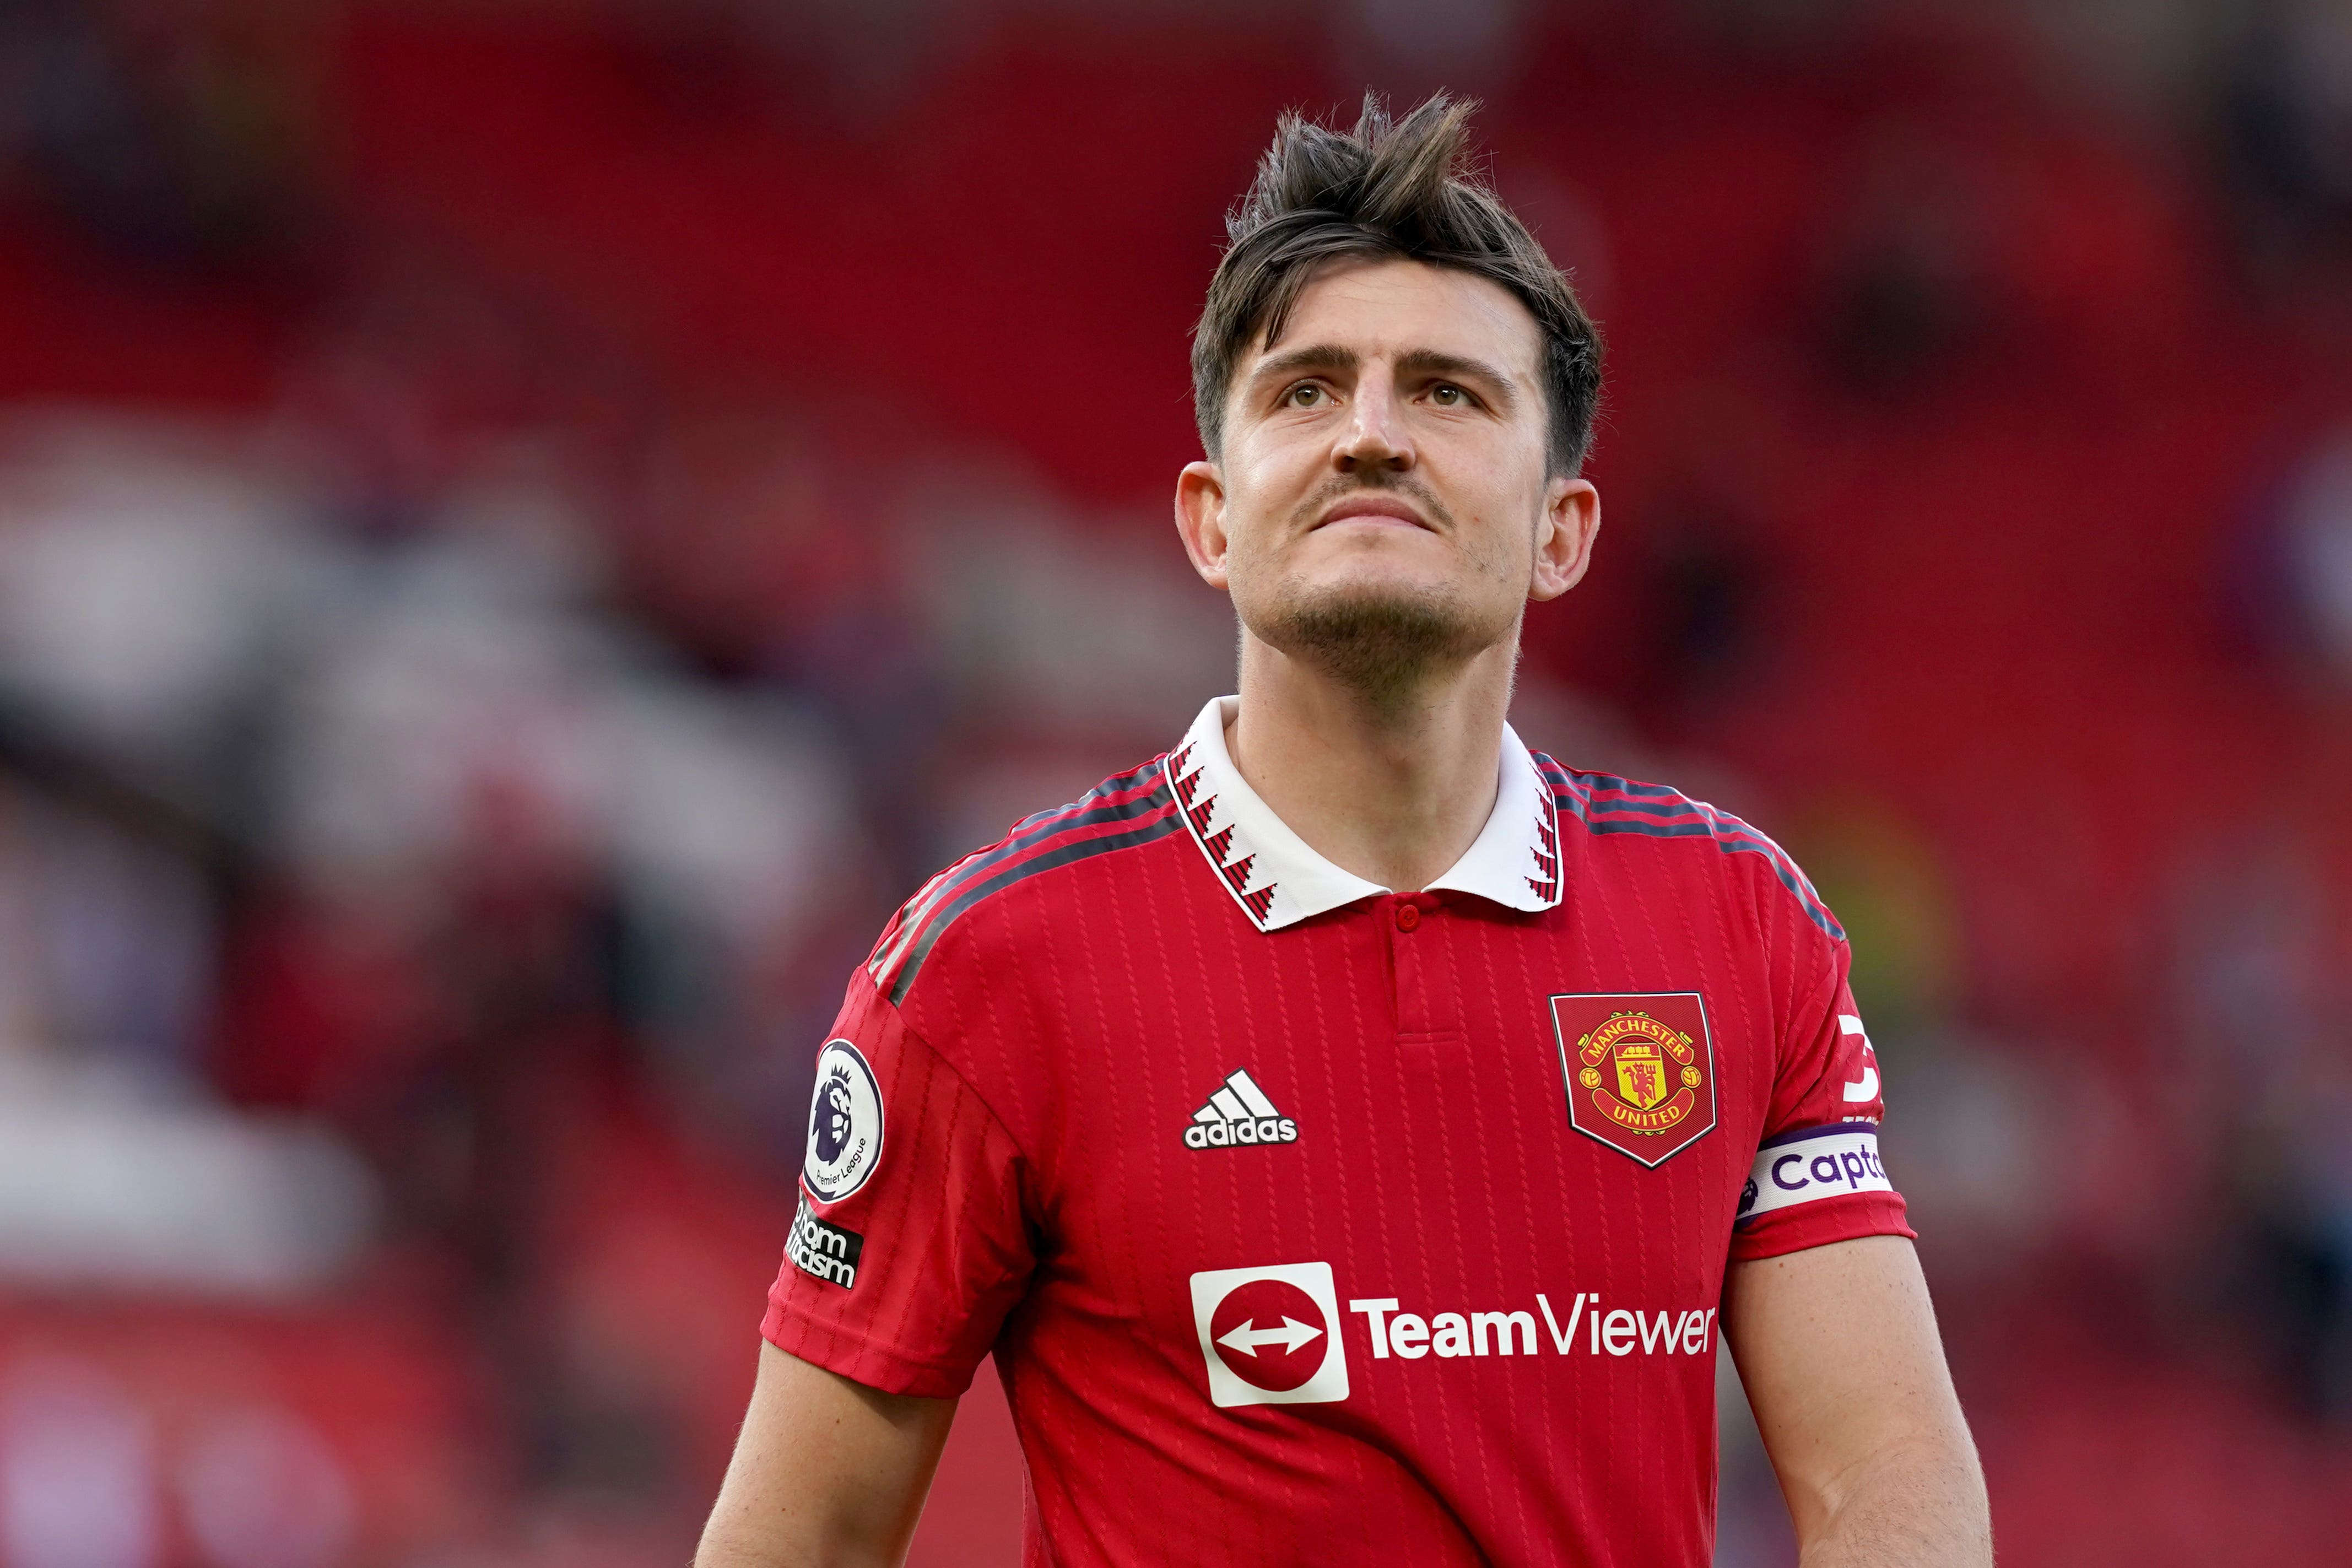 £20m Offer For Harry Maguire; This Is What Manchester United Respond